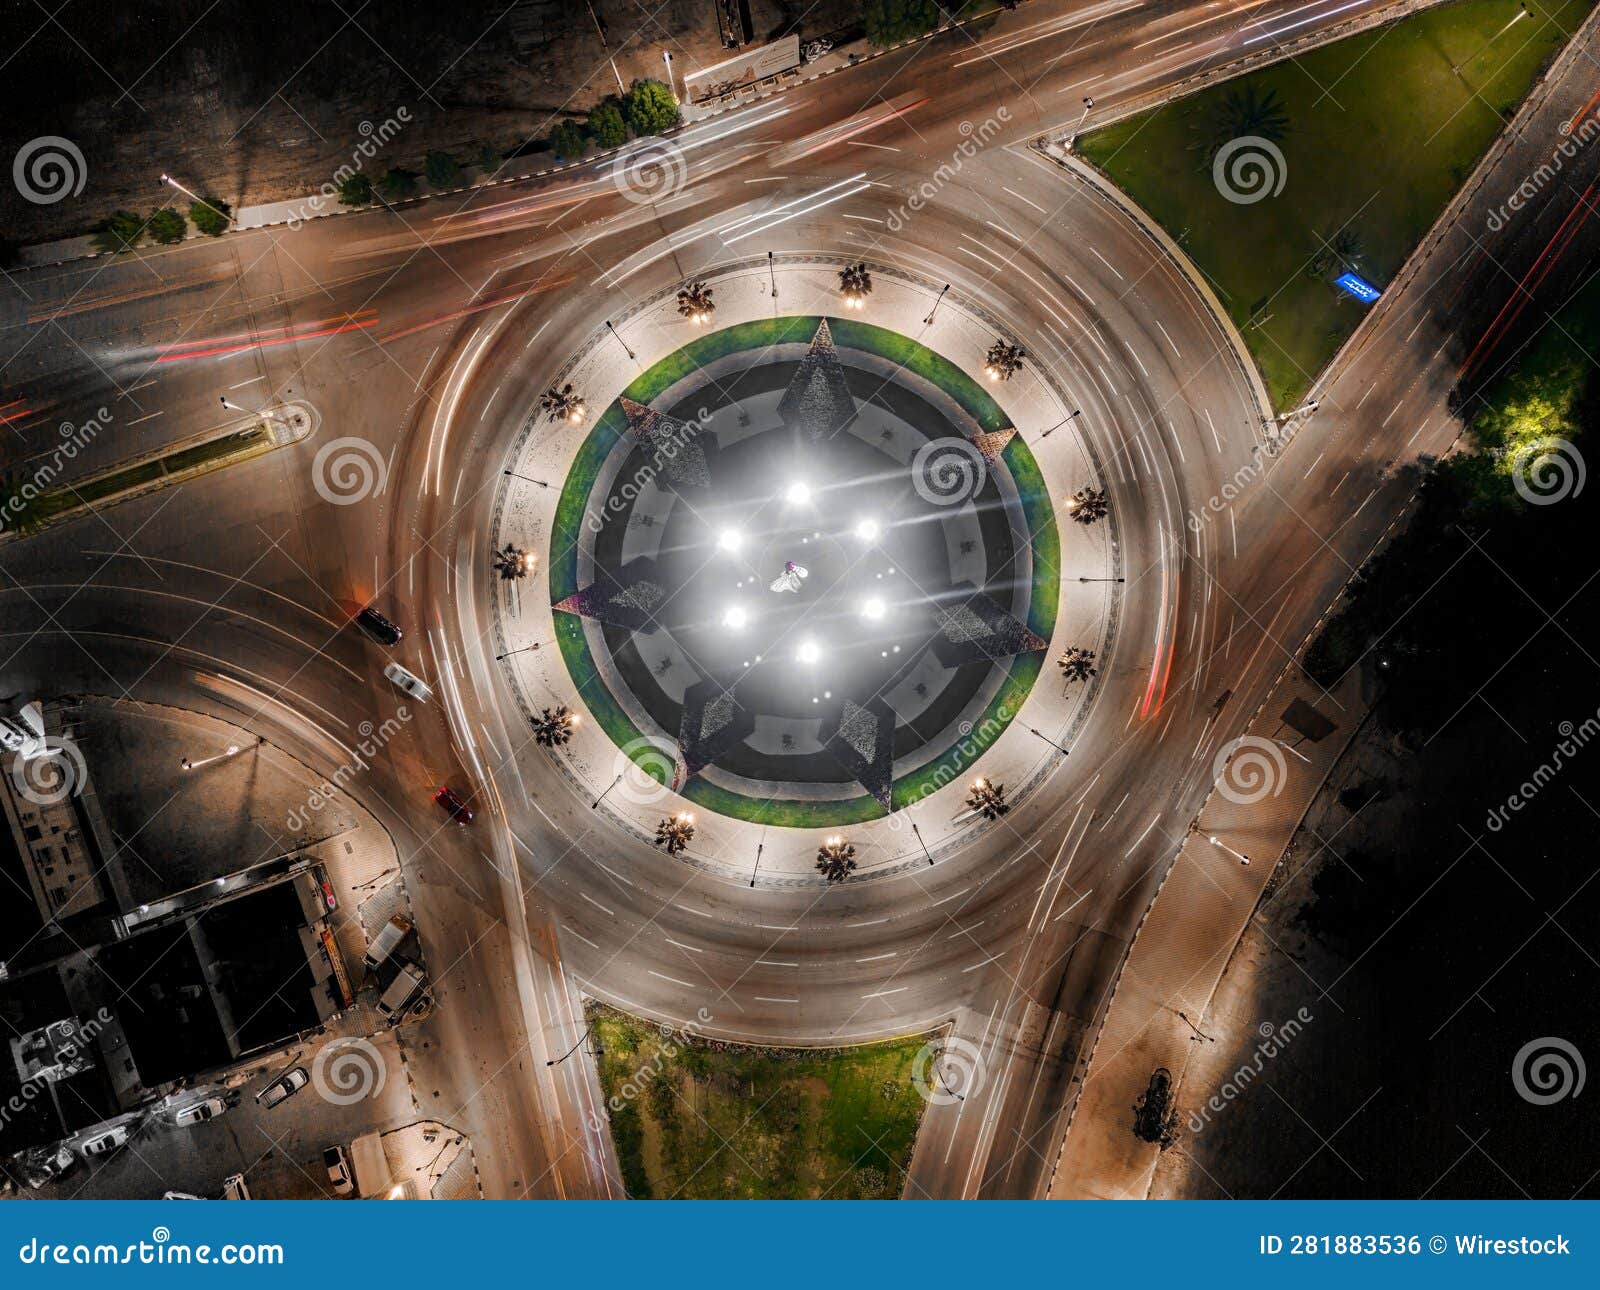 aerial view of a traffic busy roundabout in qatif, saudi arabia.